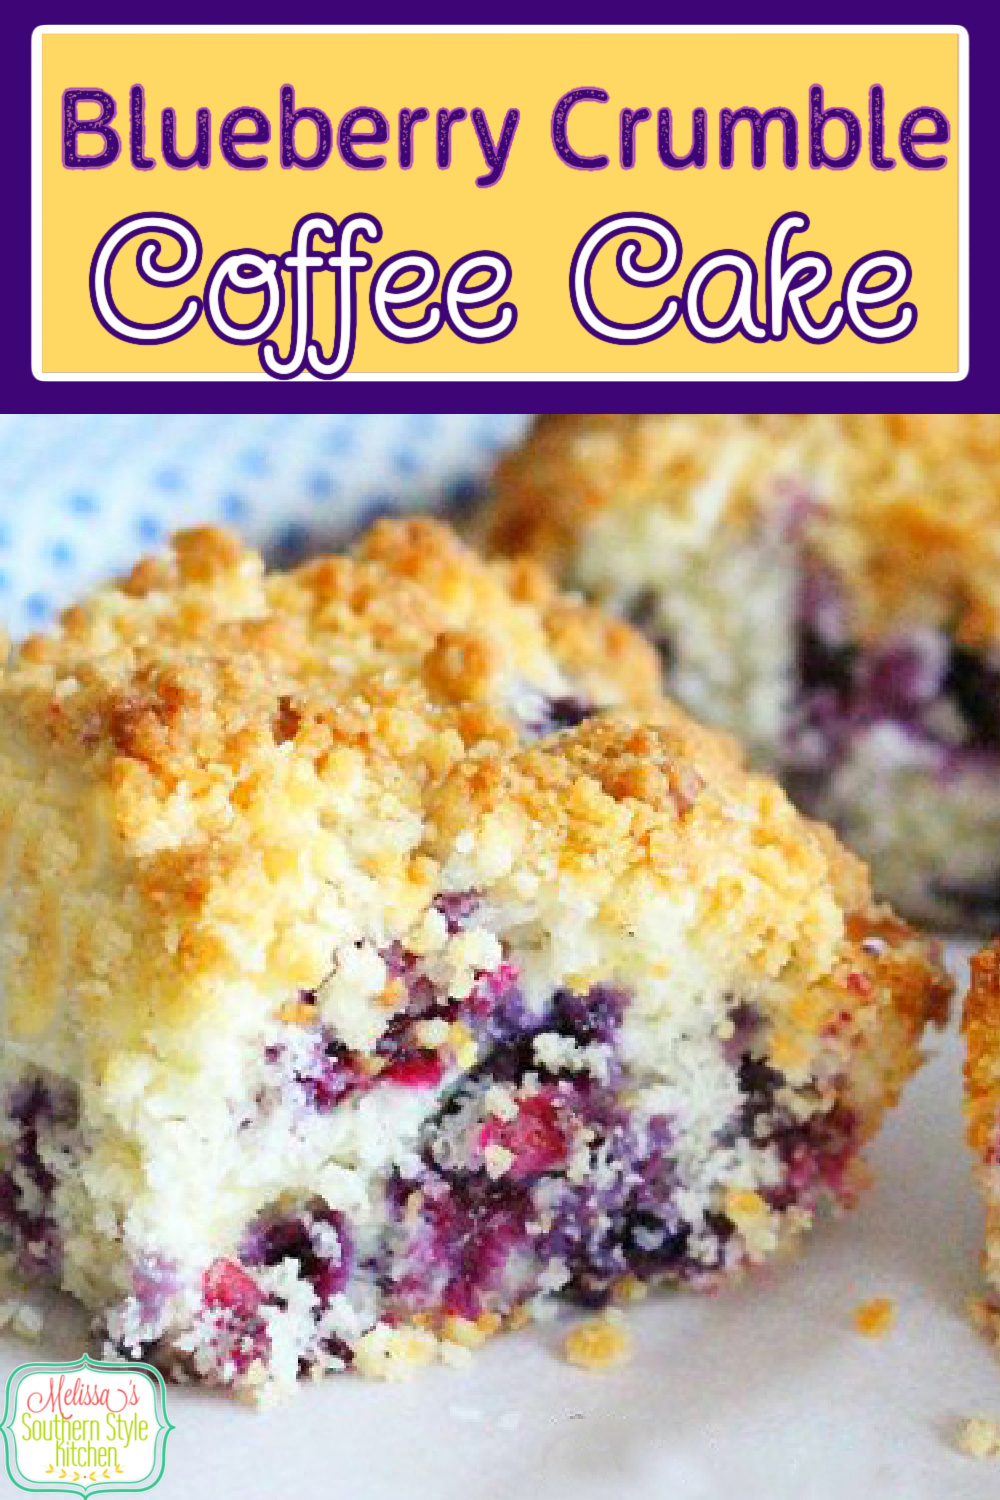 Enjoy a big piece of this Blueberry Crumble Coffee Cake any time o day #blueberrycrumblecoffeecake #blueberrycrumble #coffeecake #cakerecipes #teatime #brunch #breakfast #desserts #holidaybrunch #holidays #holidayrecipes #southernrecipes #southernfood via @melissasssk